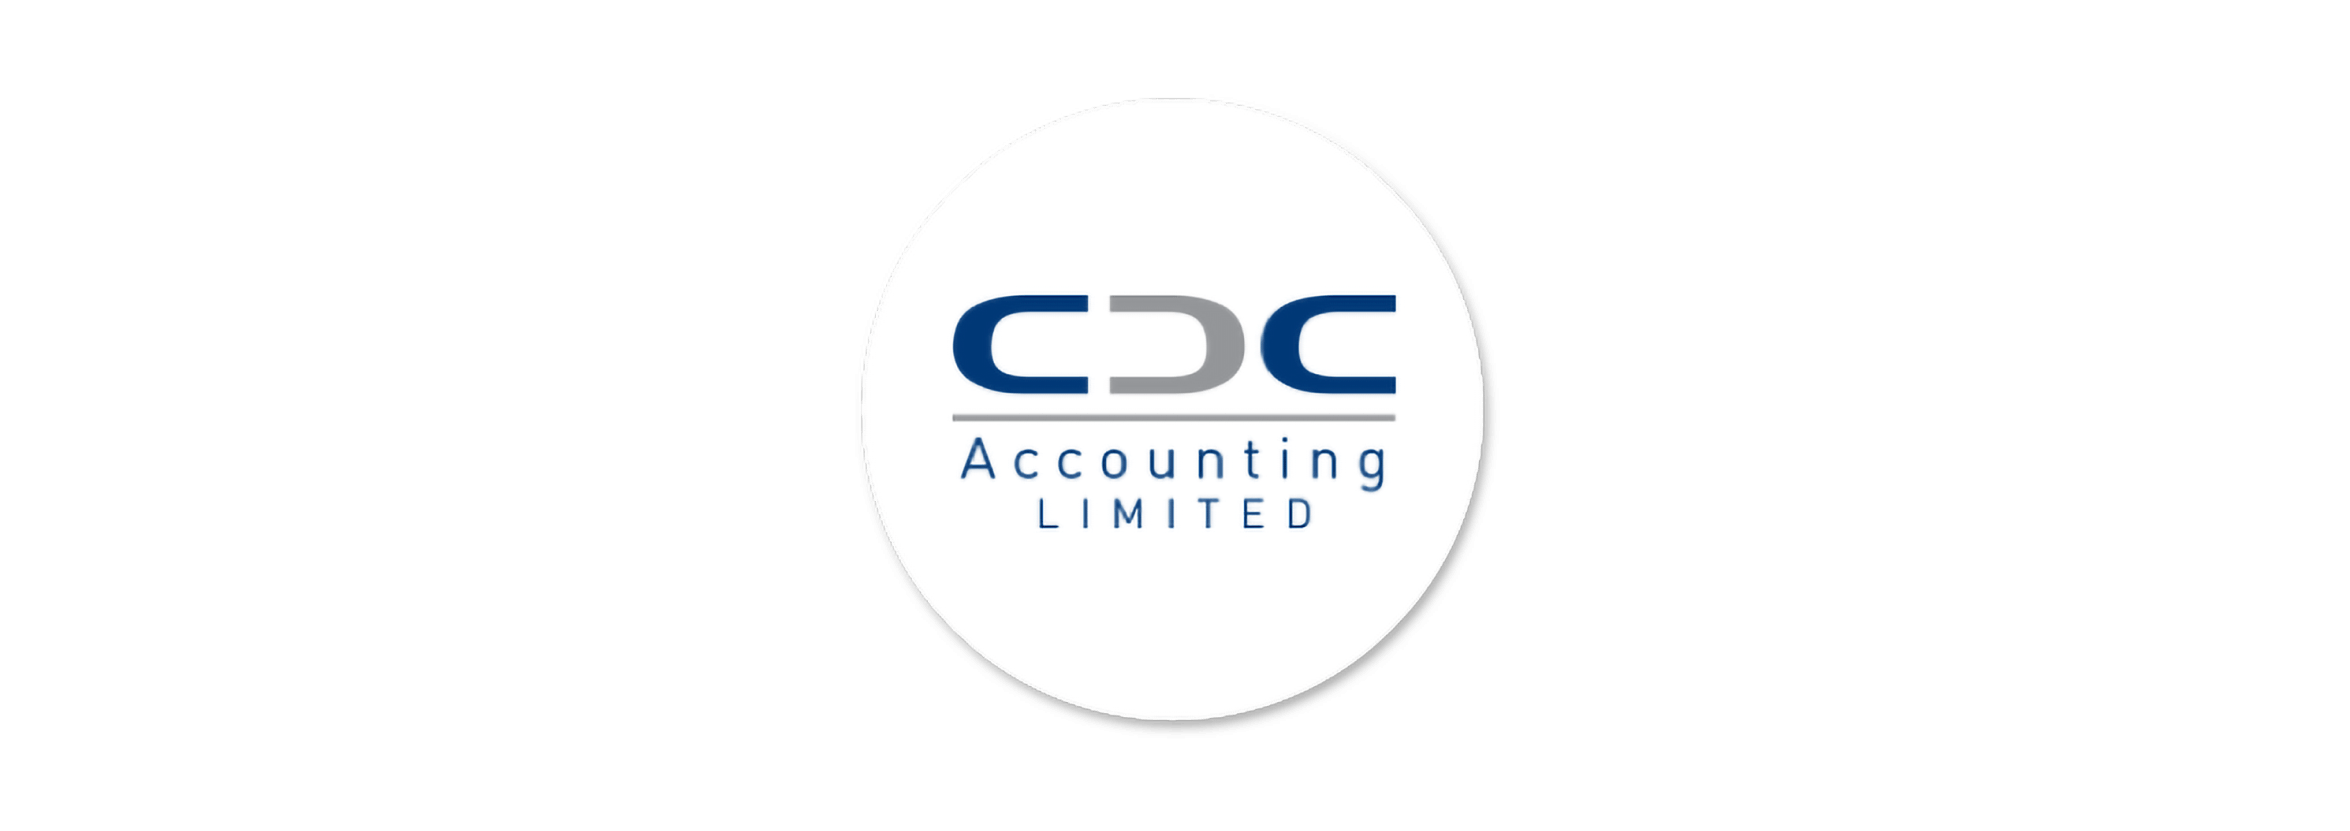 Logo of CDC Accounting